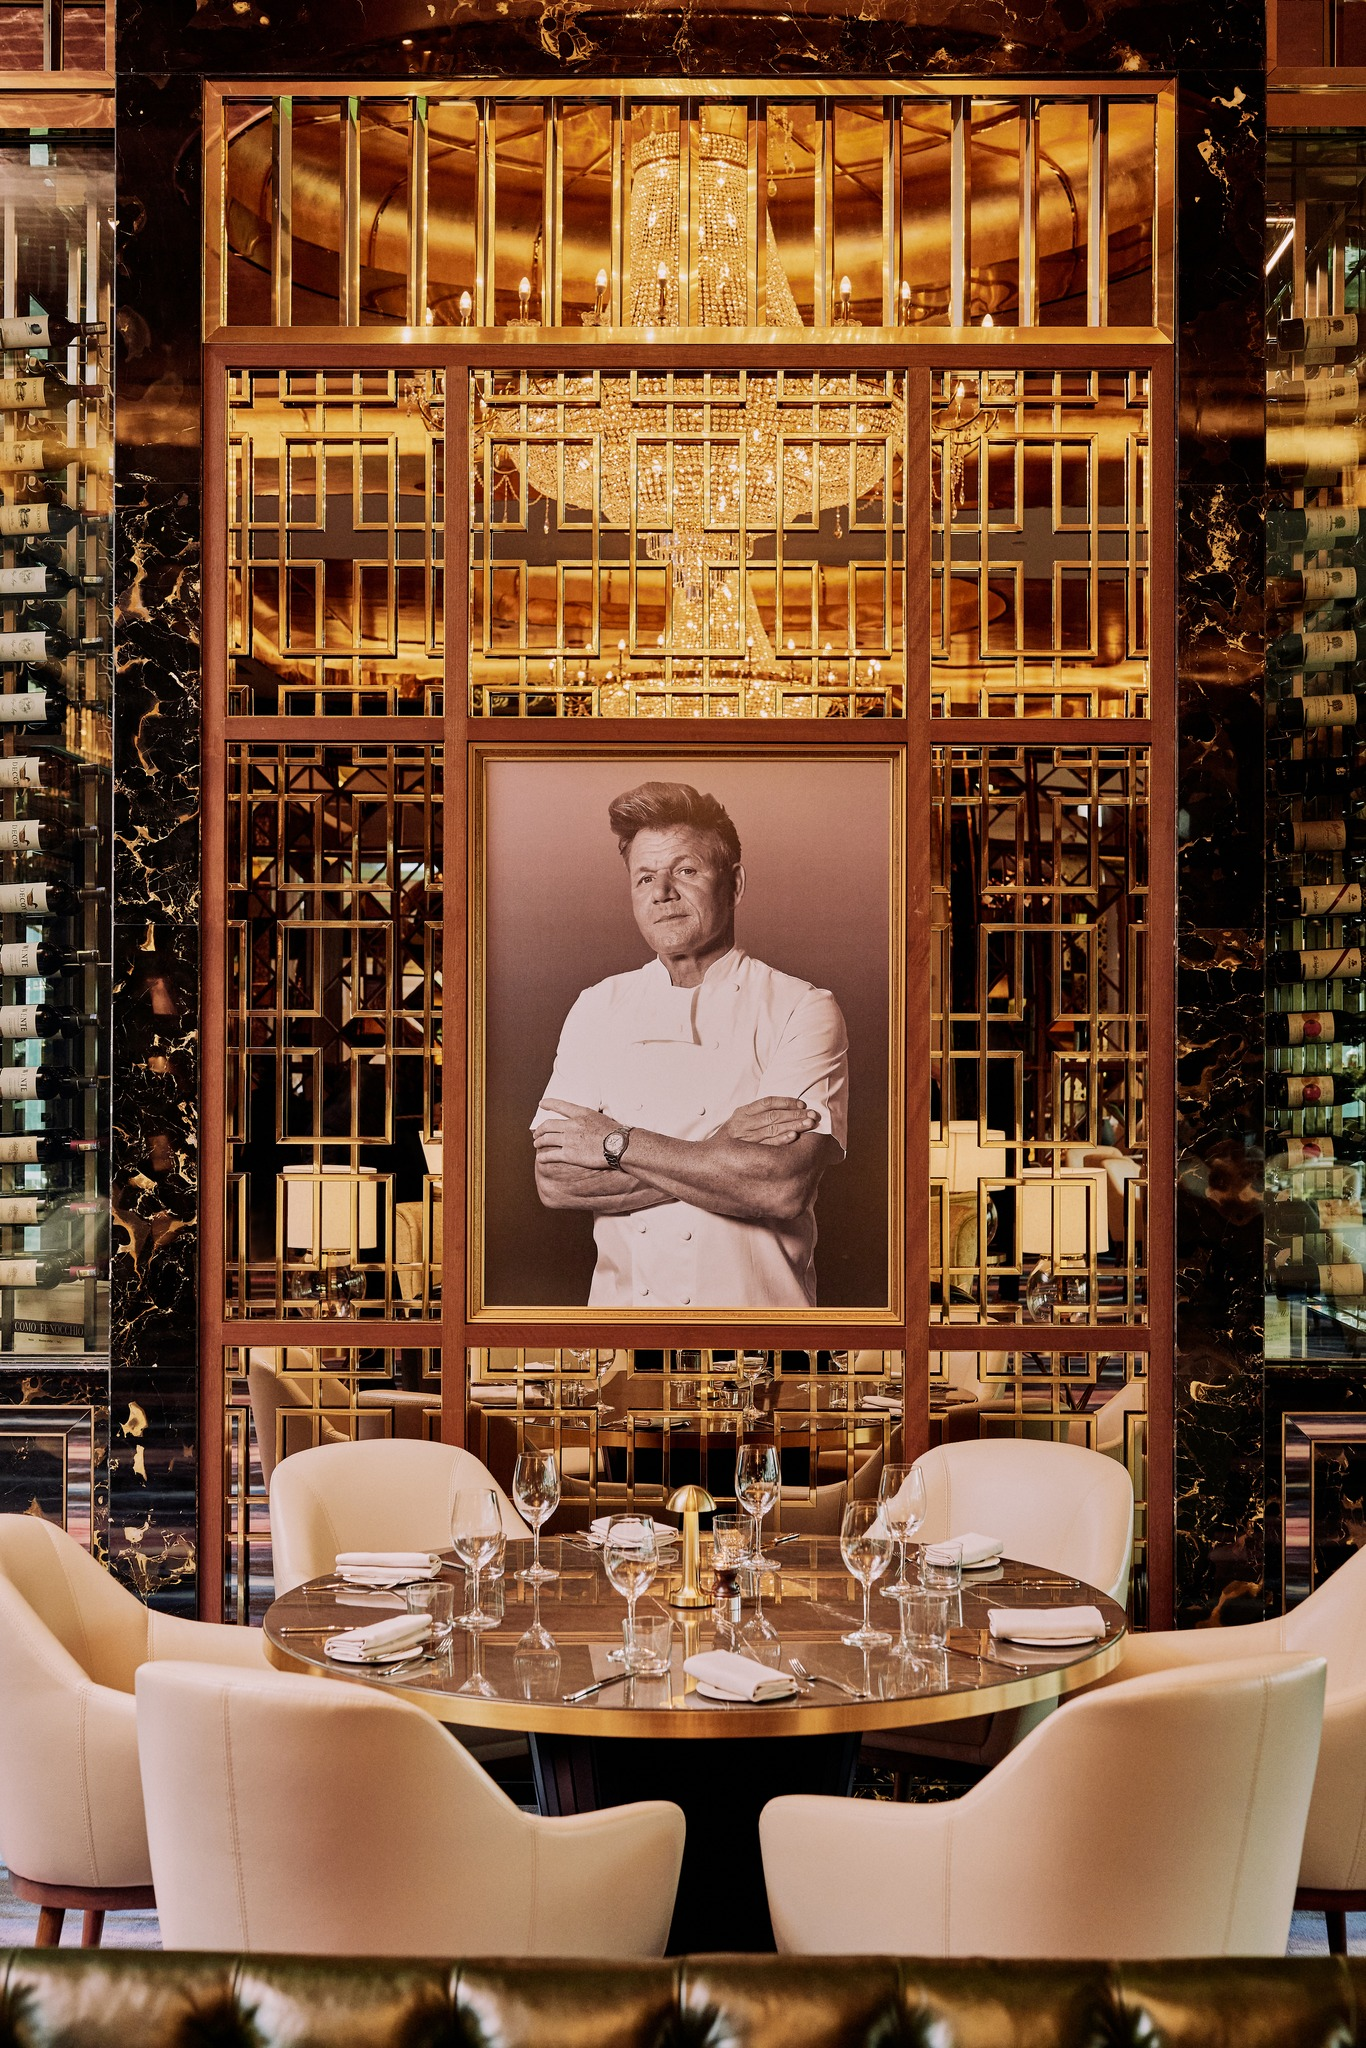 Gordan Ramsay Bar & Grill open at Sunway Resort for dining from June 18th on!